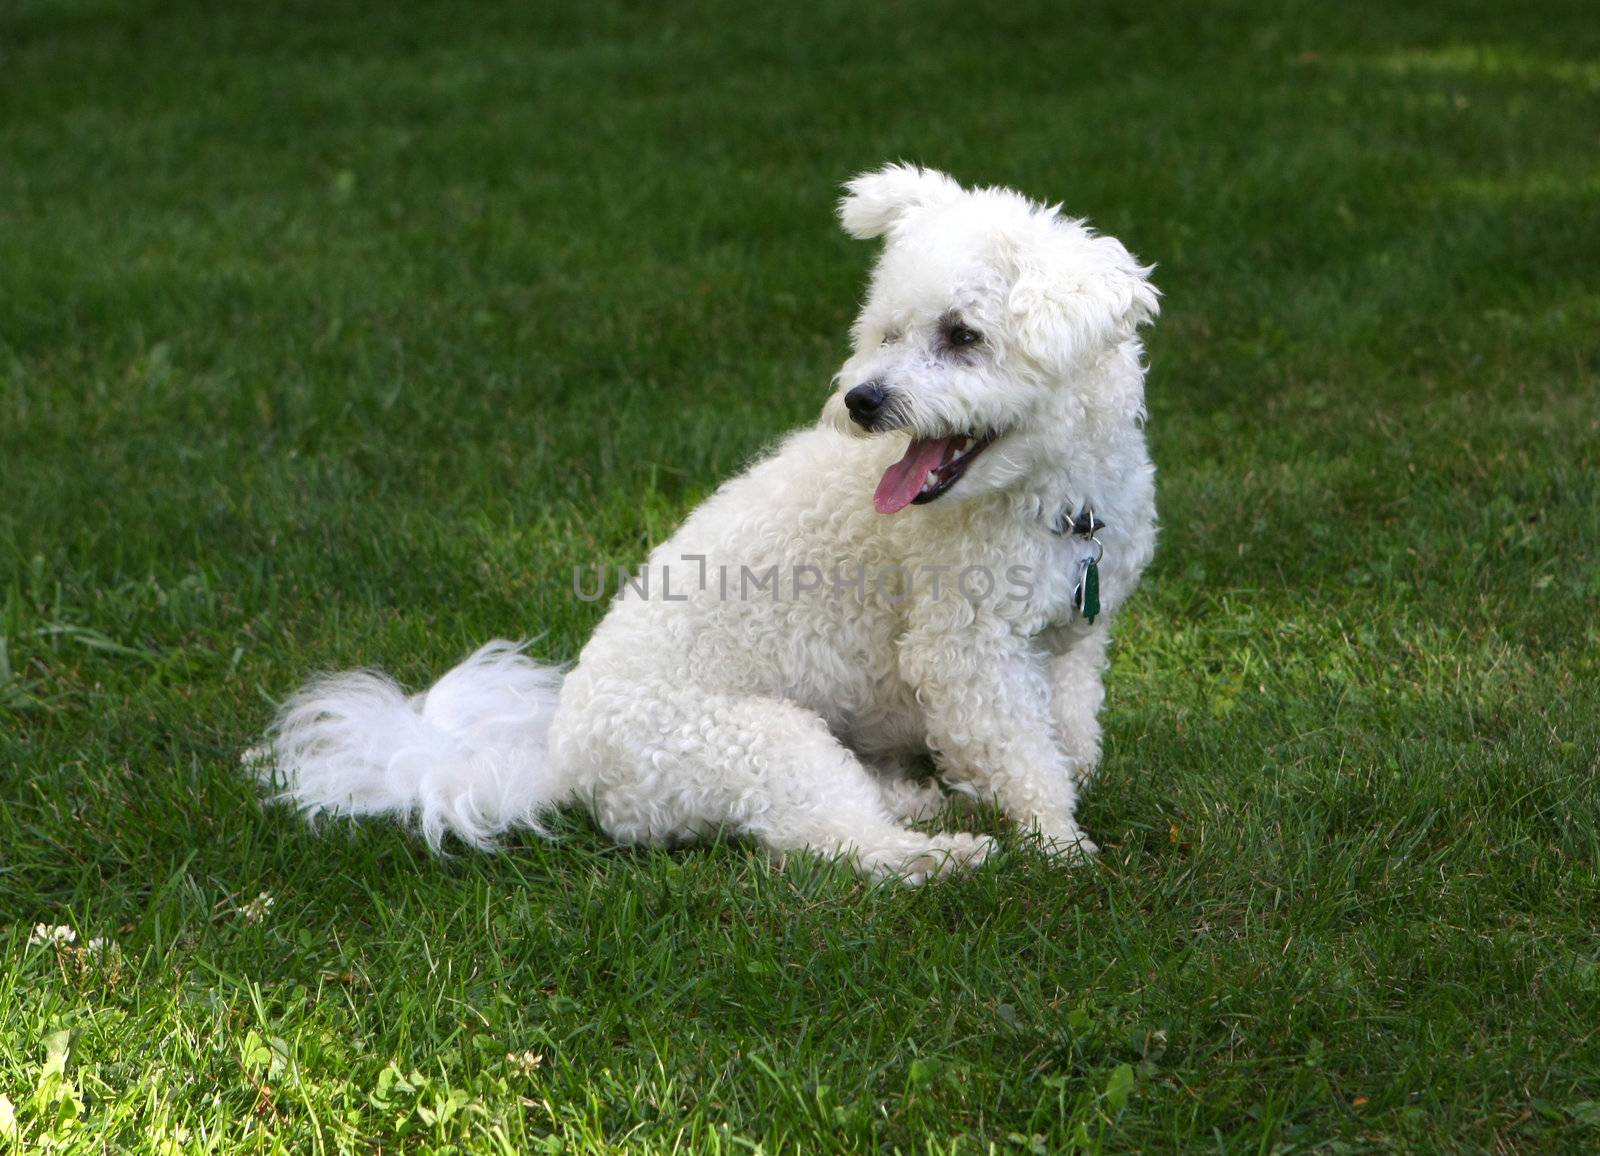 Bichon frise sitting on grass in afternoon shade